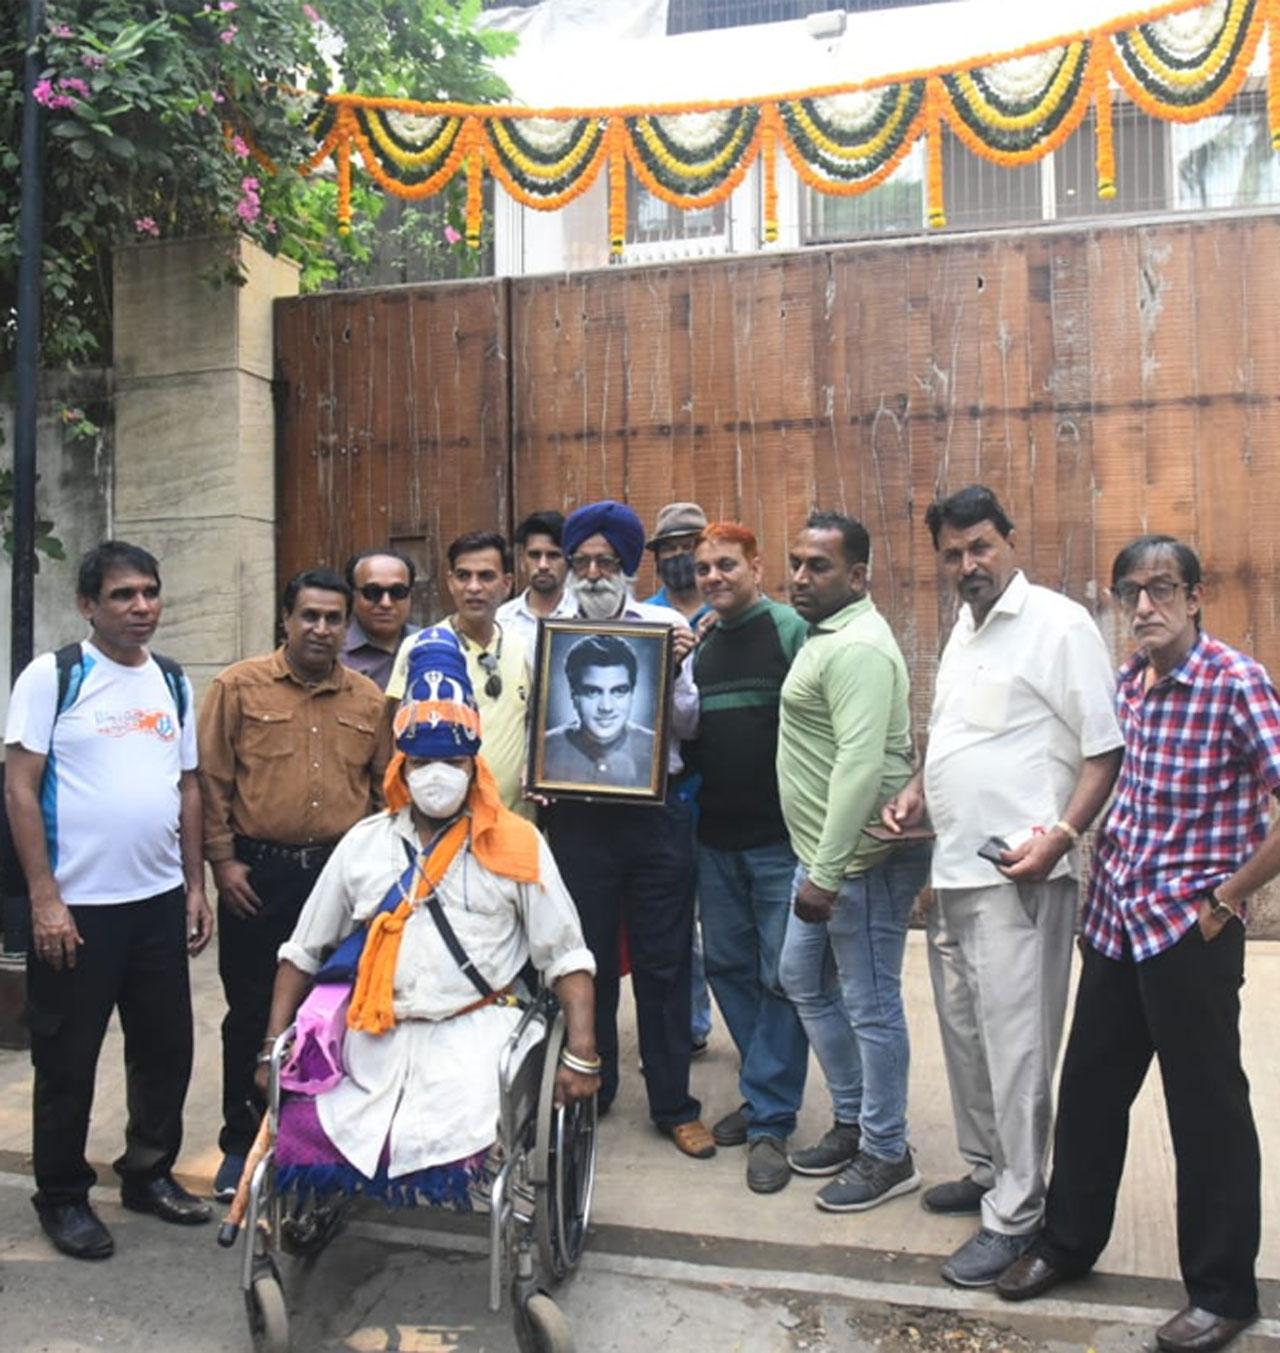 And then, all the fans that were spotted at his residence came together for a perfect picture. There were over 14 people that were standing outside his house to celebrate the He-Man of Hindi Cinema’s 86th birthday.